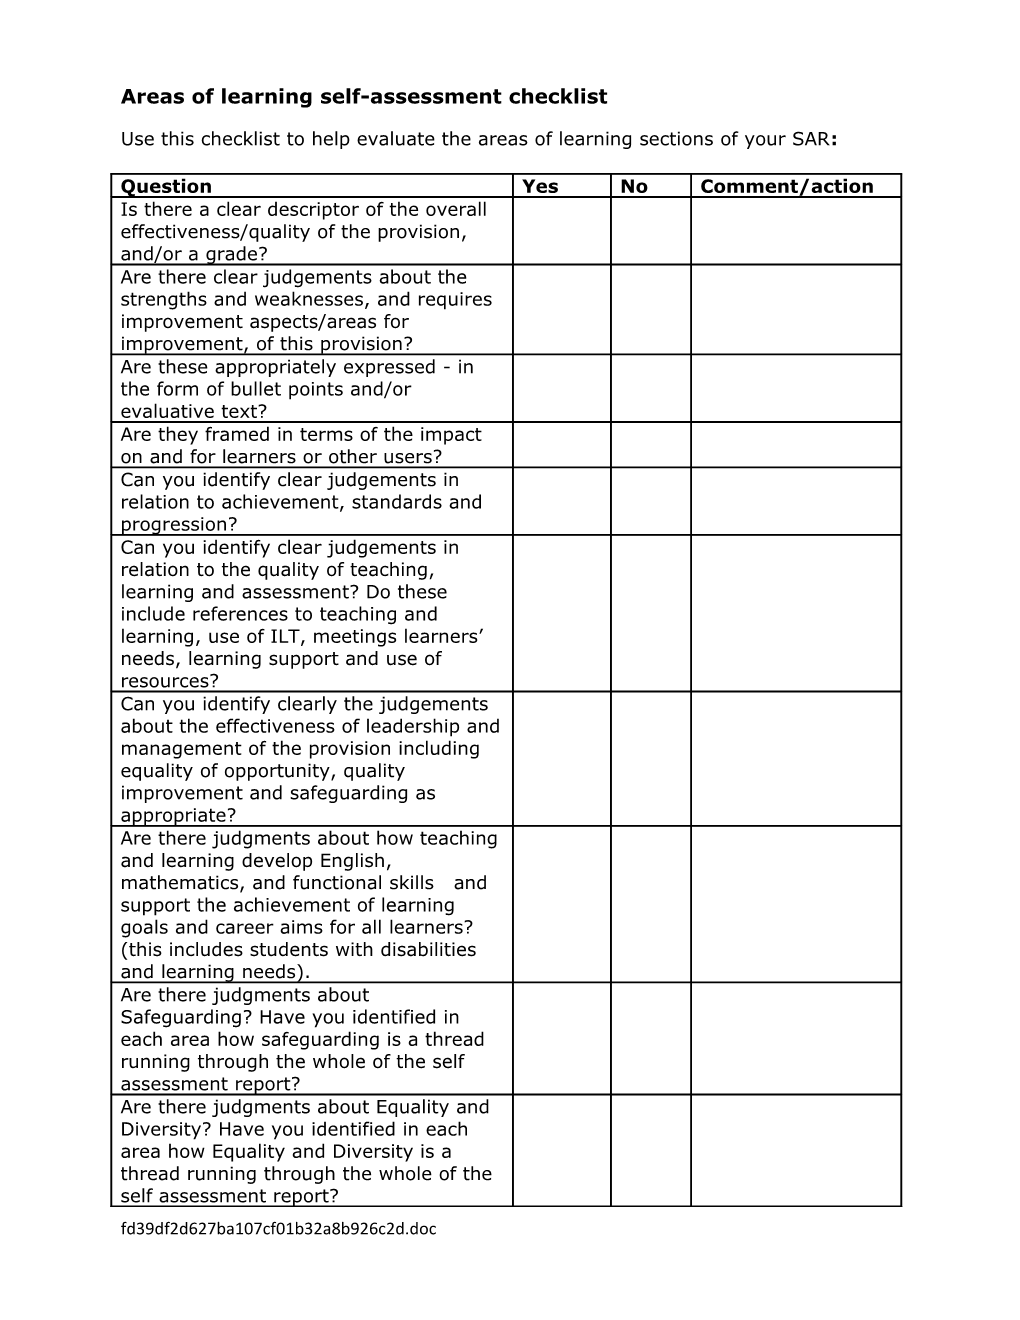 Areas of Learning Self-Assessment Checklist